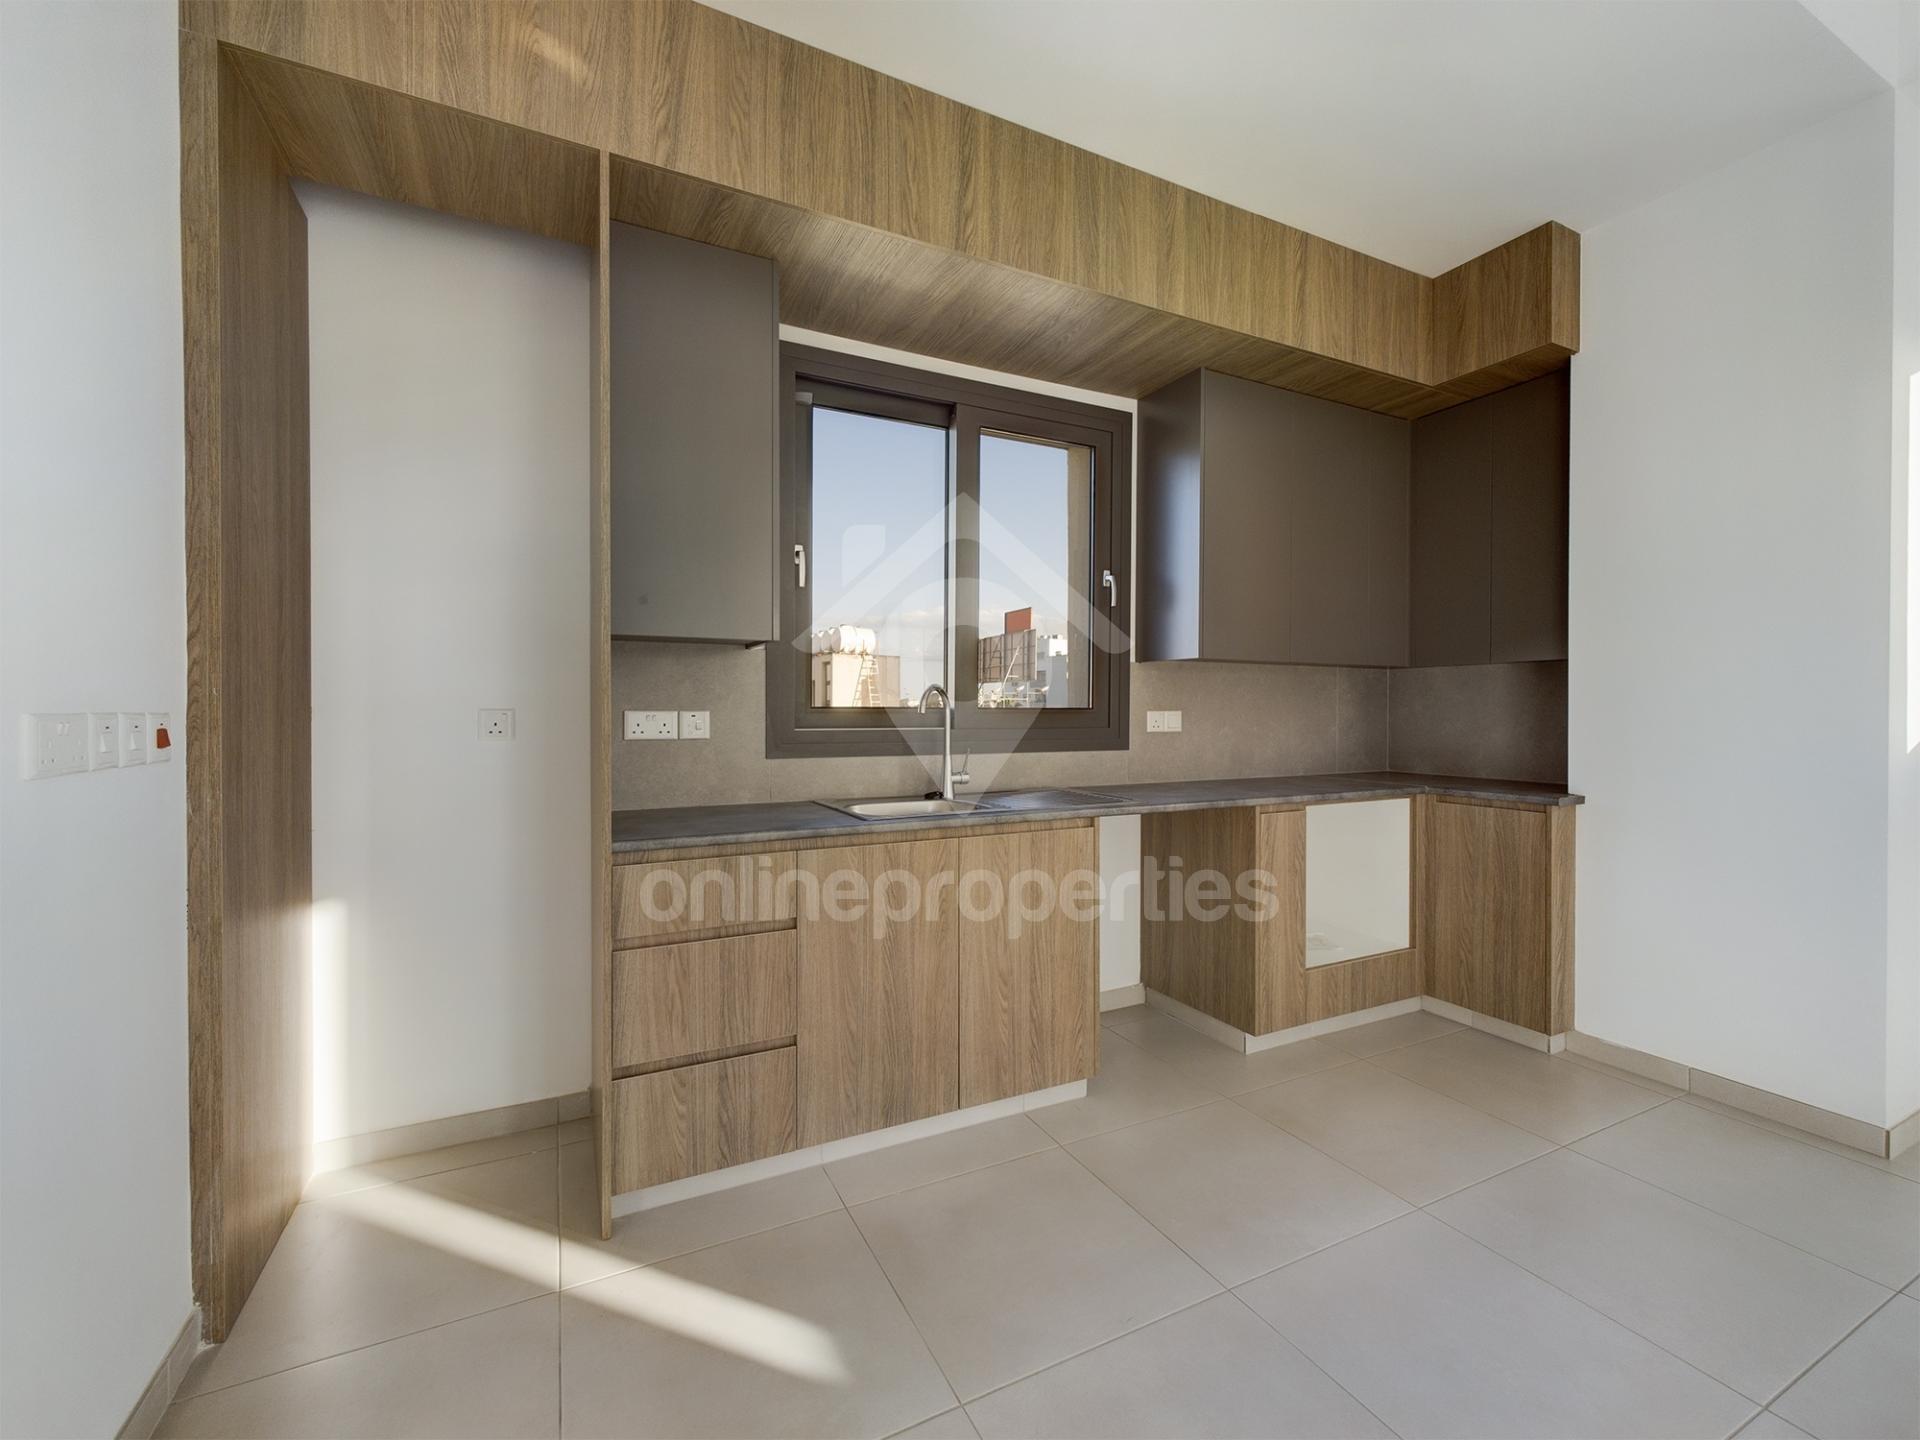  Contemporary two bedrooms city apartment, great opportunity investment, high ROI 